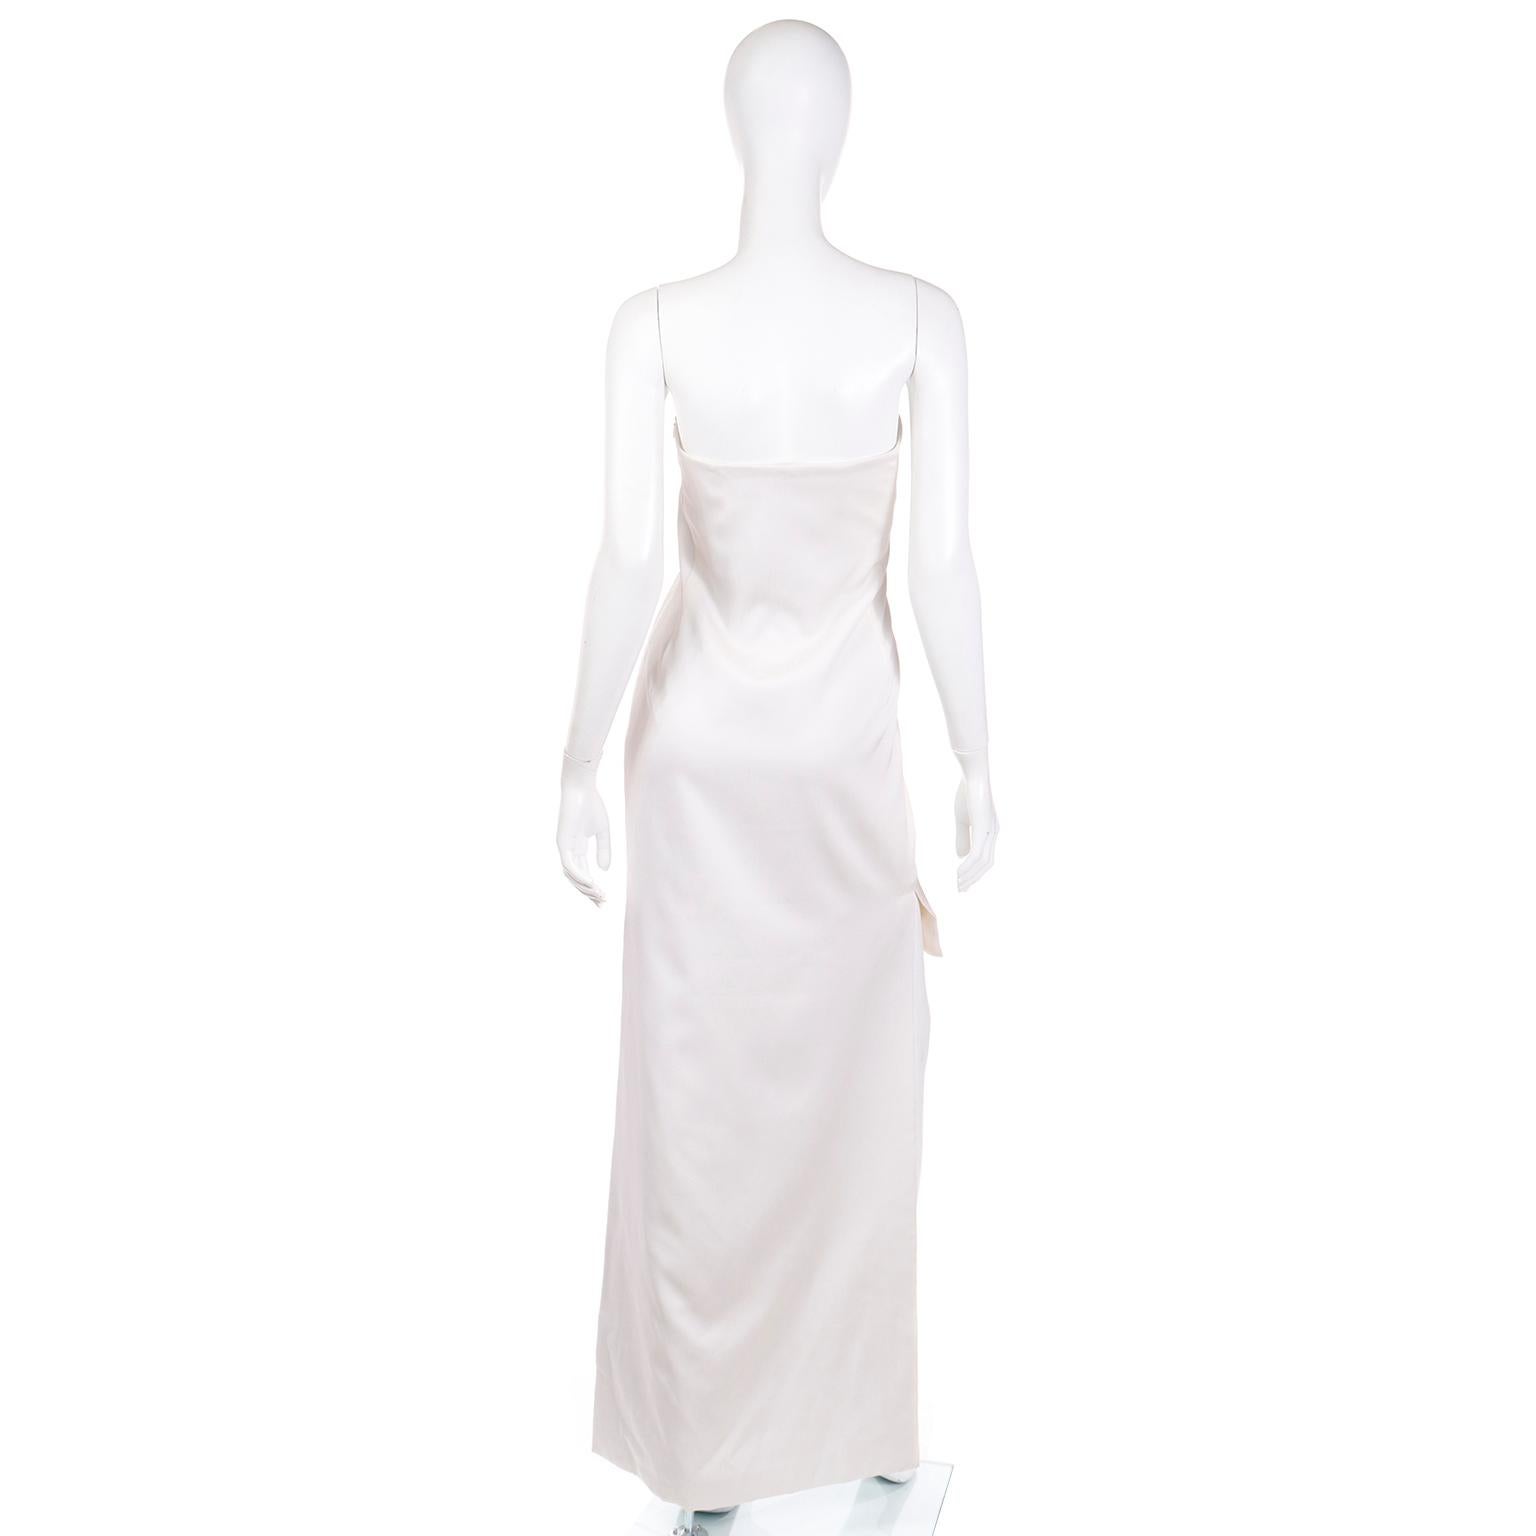 2001 Tom Ford for Yves Saint Laurent Strapless White Dress w Black Feather Train For Sale 1